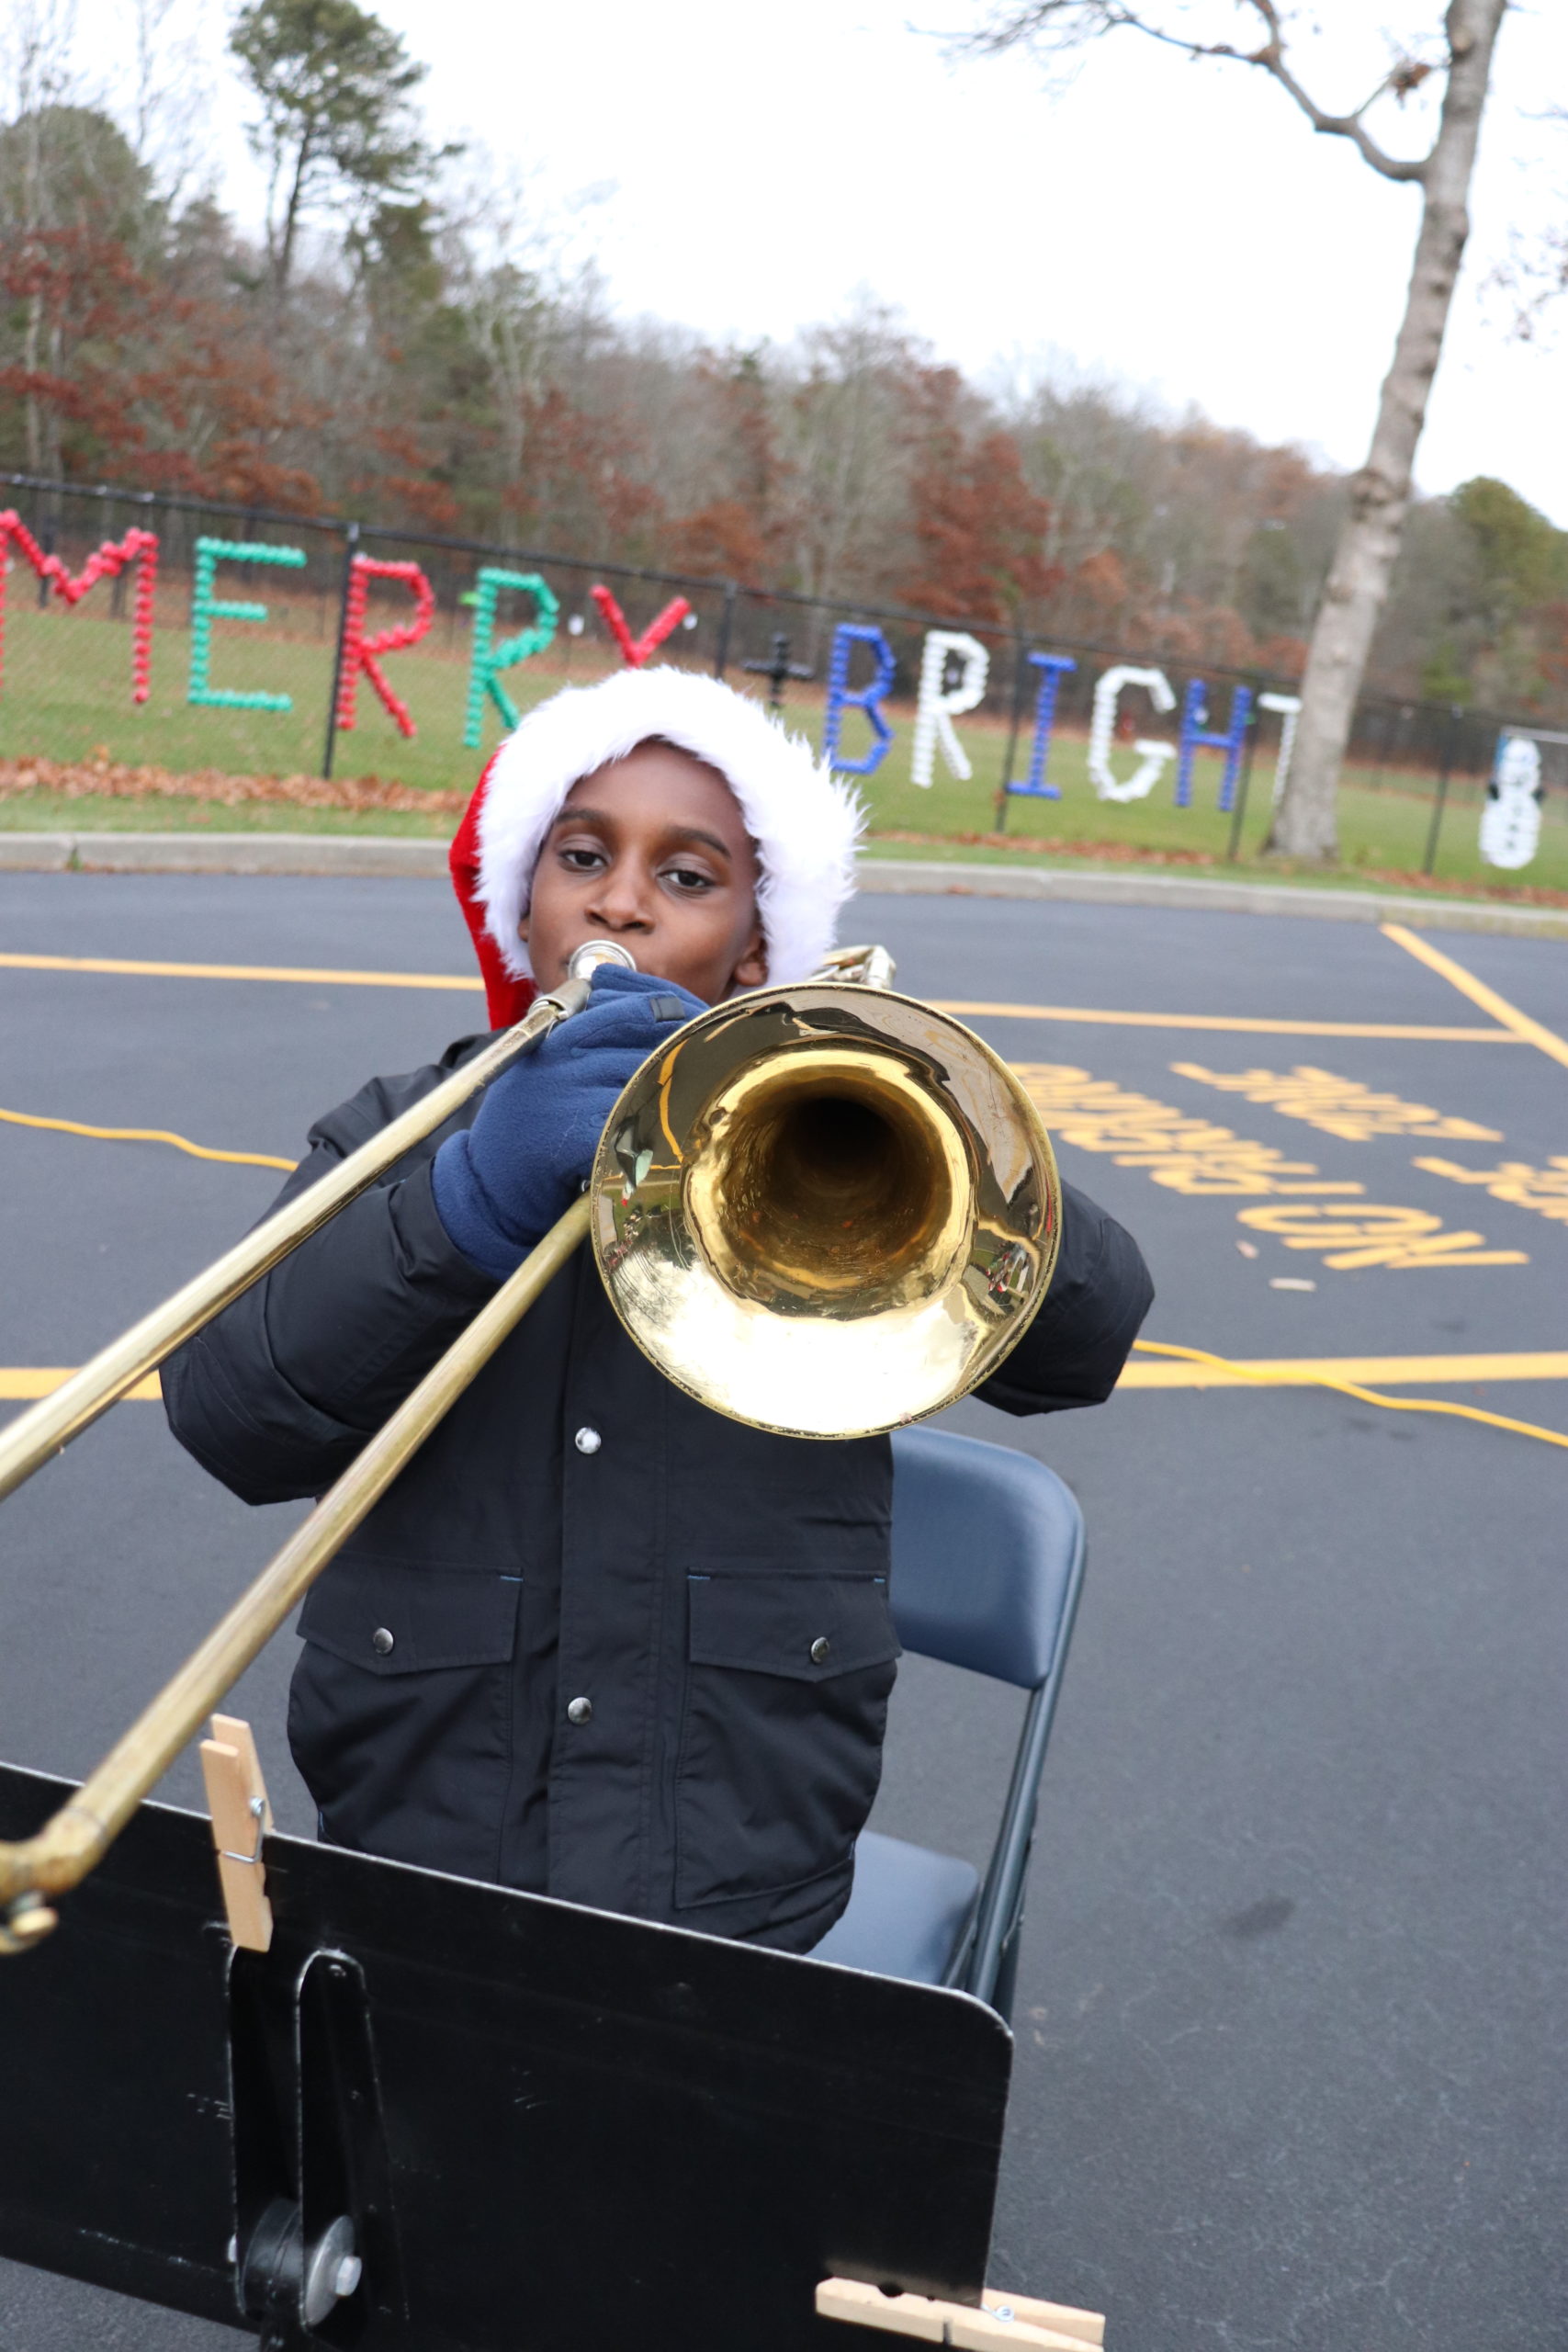 Raynor Country Day School recently hosted a series of winter concerts showcasing the vocal and instrumental talents of students. Third-grader Raphael Layne plays along with the junior band.